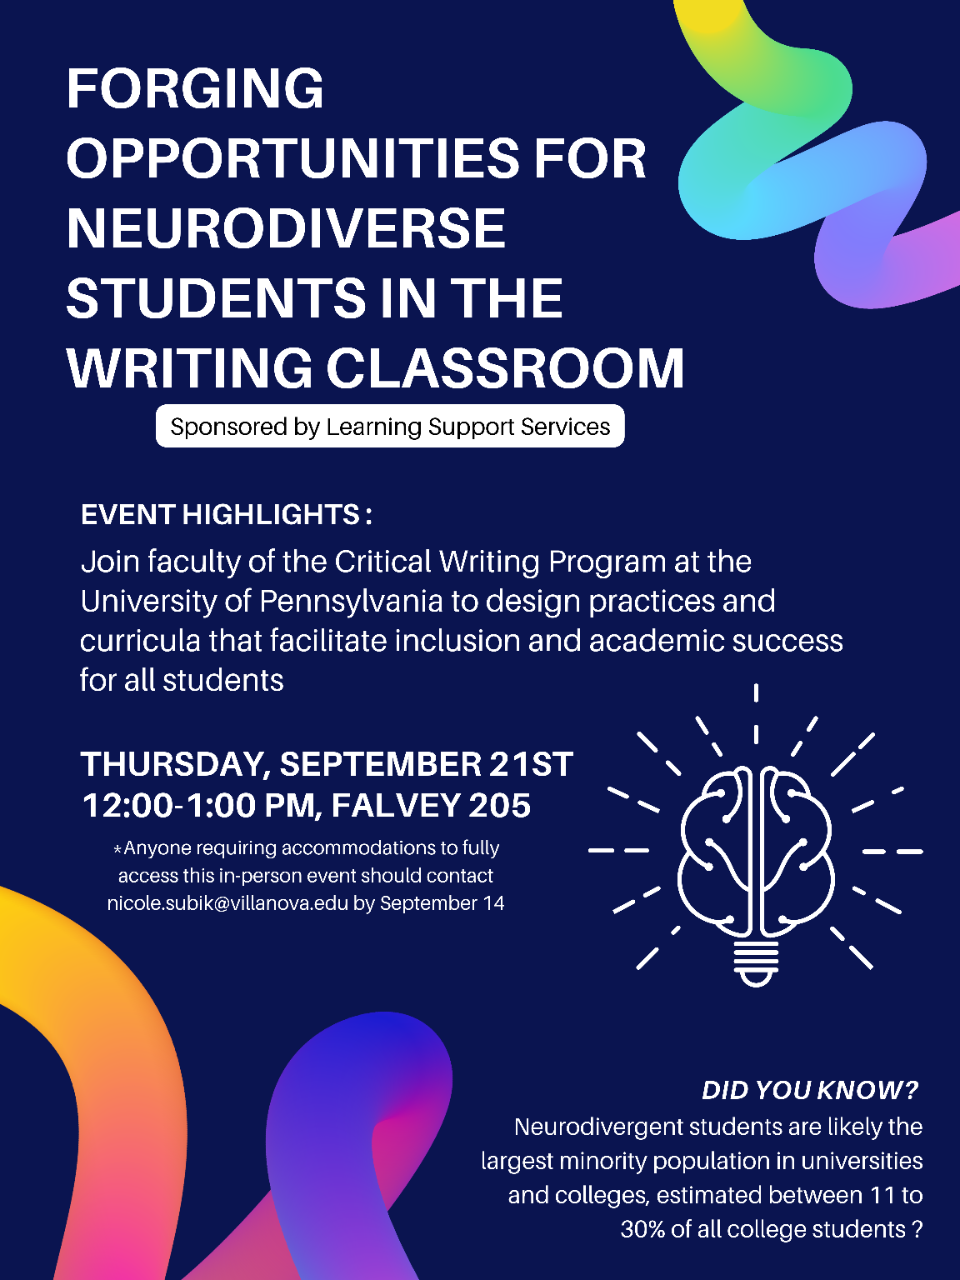 Forging Opportunities for Neurodiverse Students in the Writing Classroom workshop flyer. 